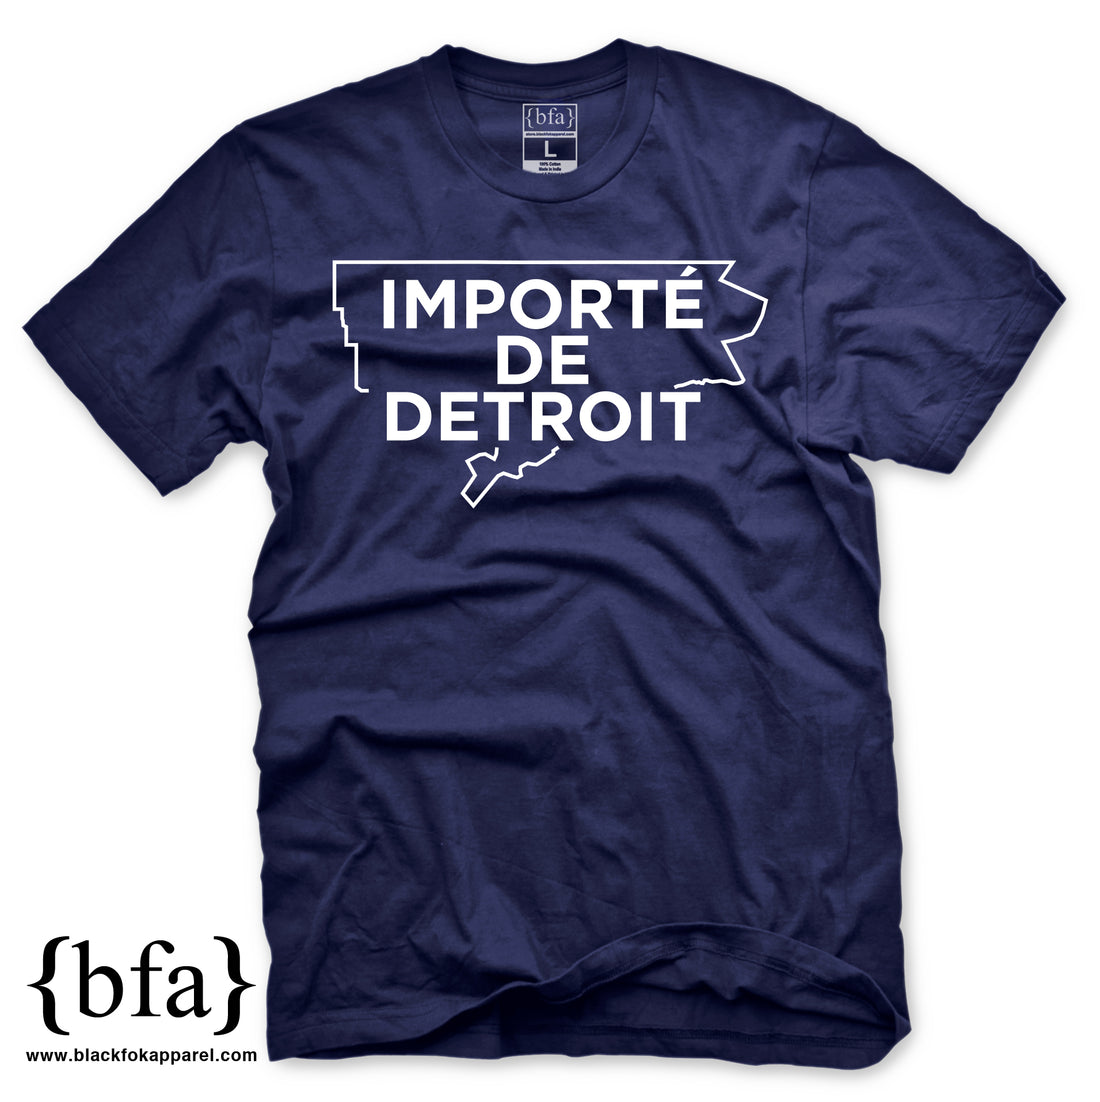 Week 8 - Importé de Detroit - Navy and White - #52weeks52shirts